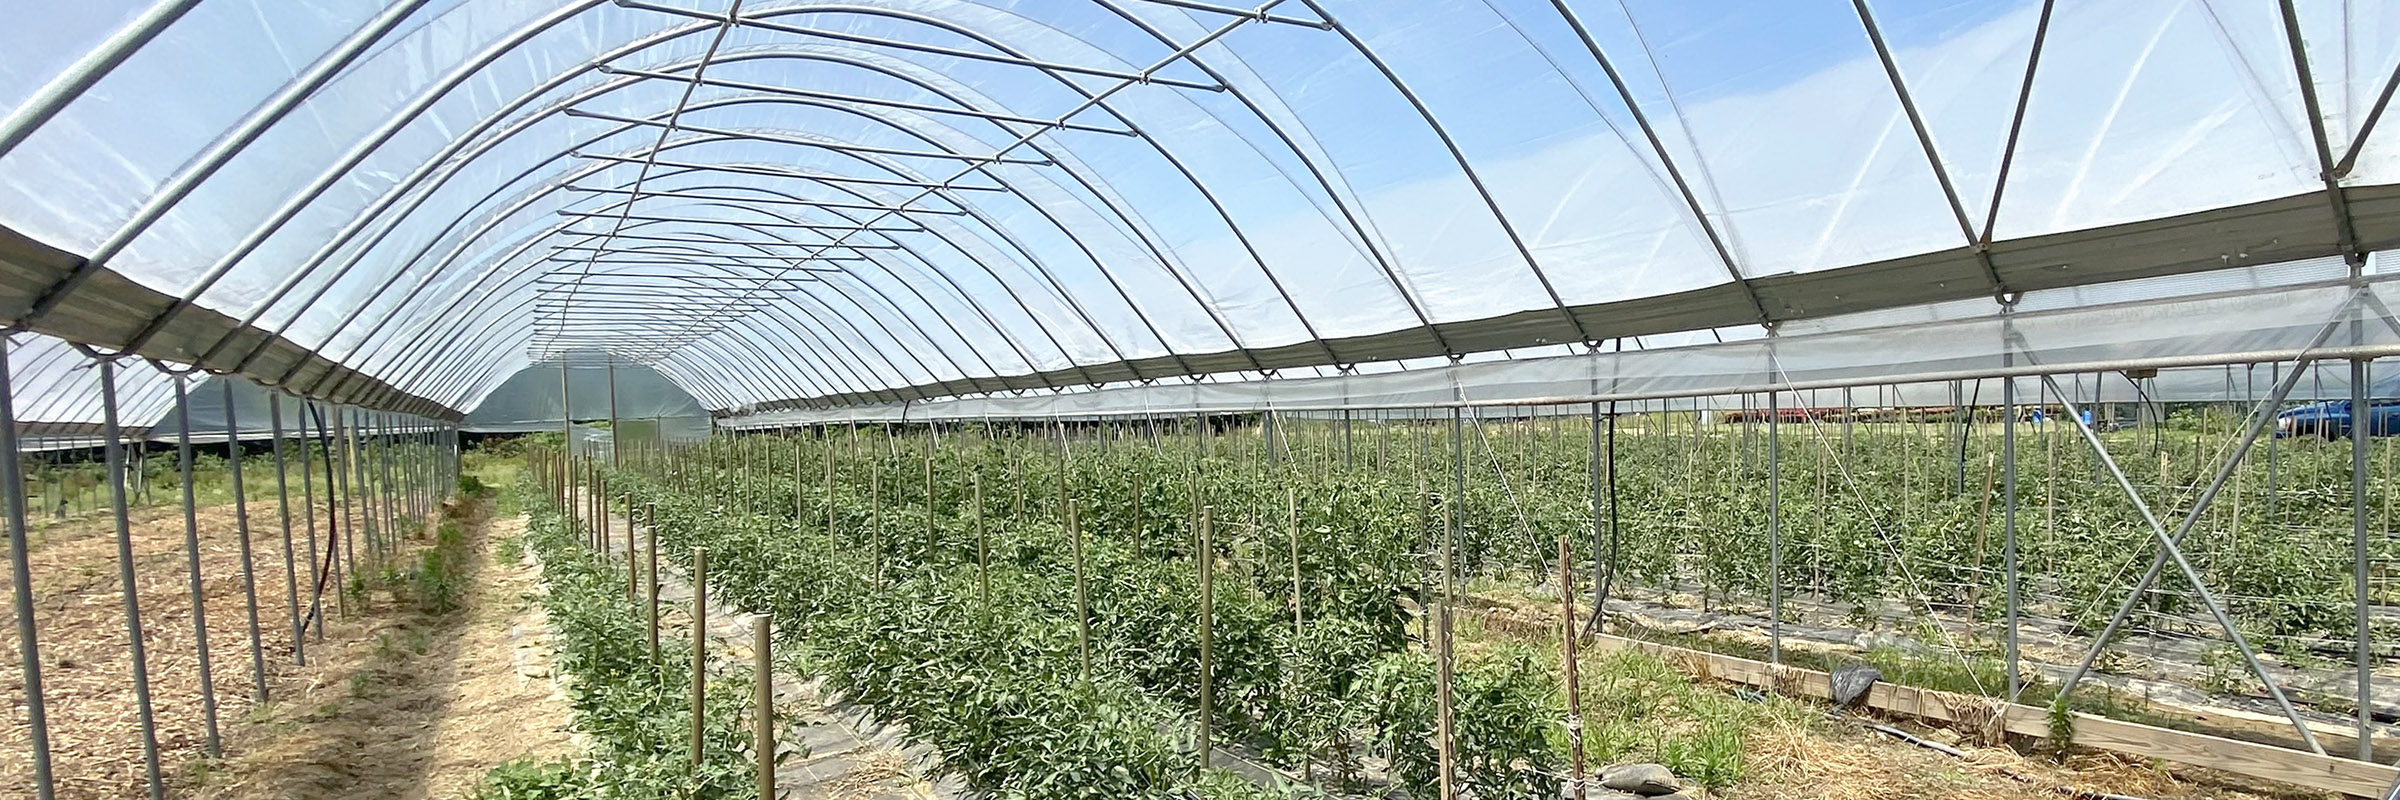 How To Install Film Onto Greenhouses